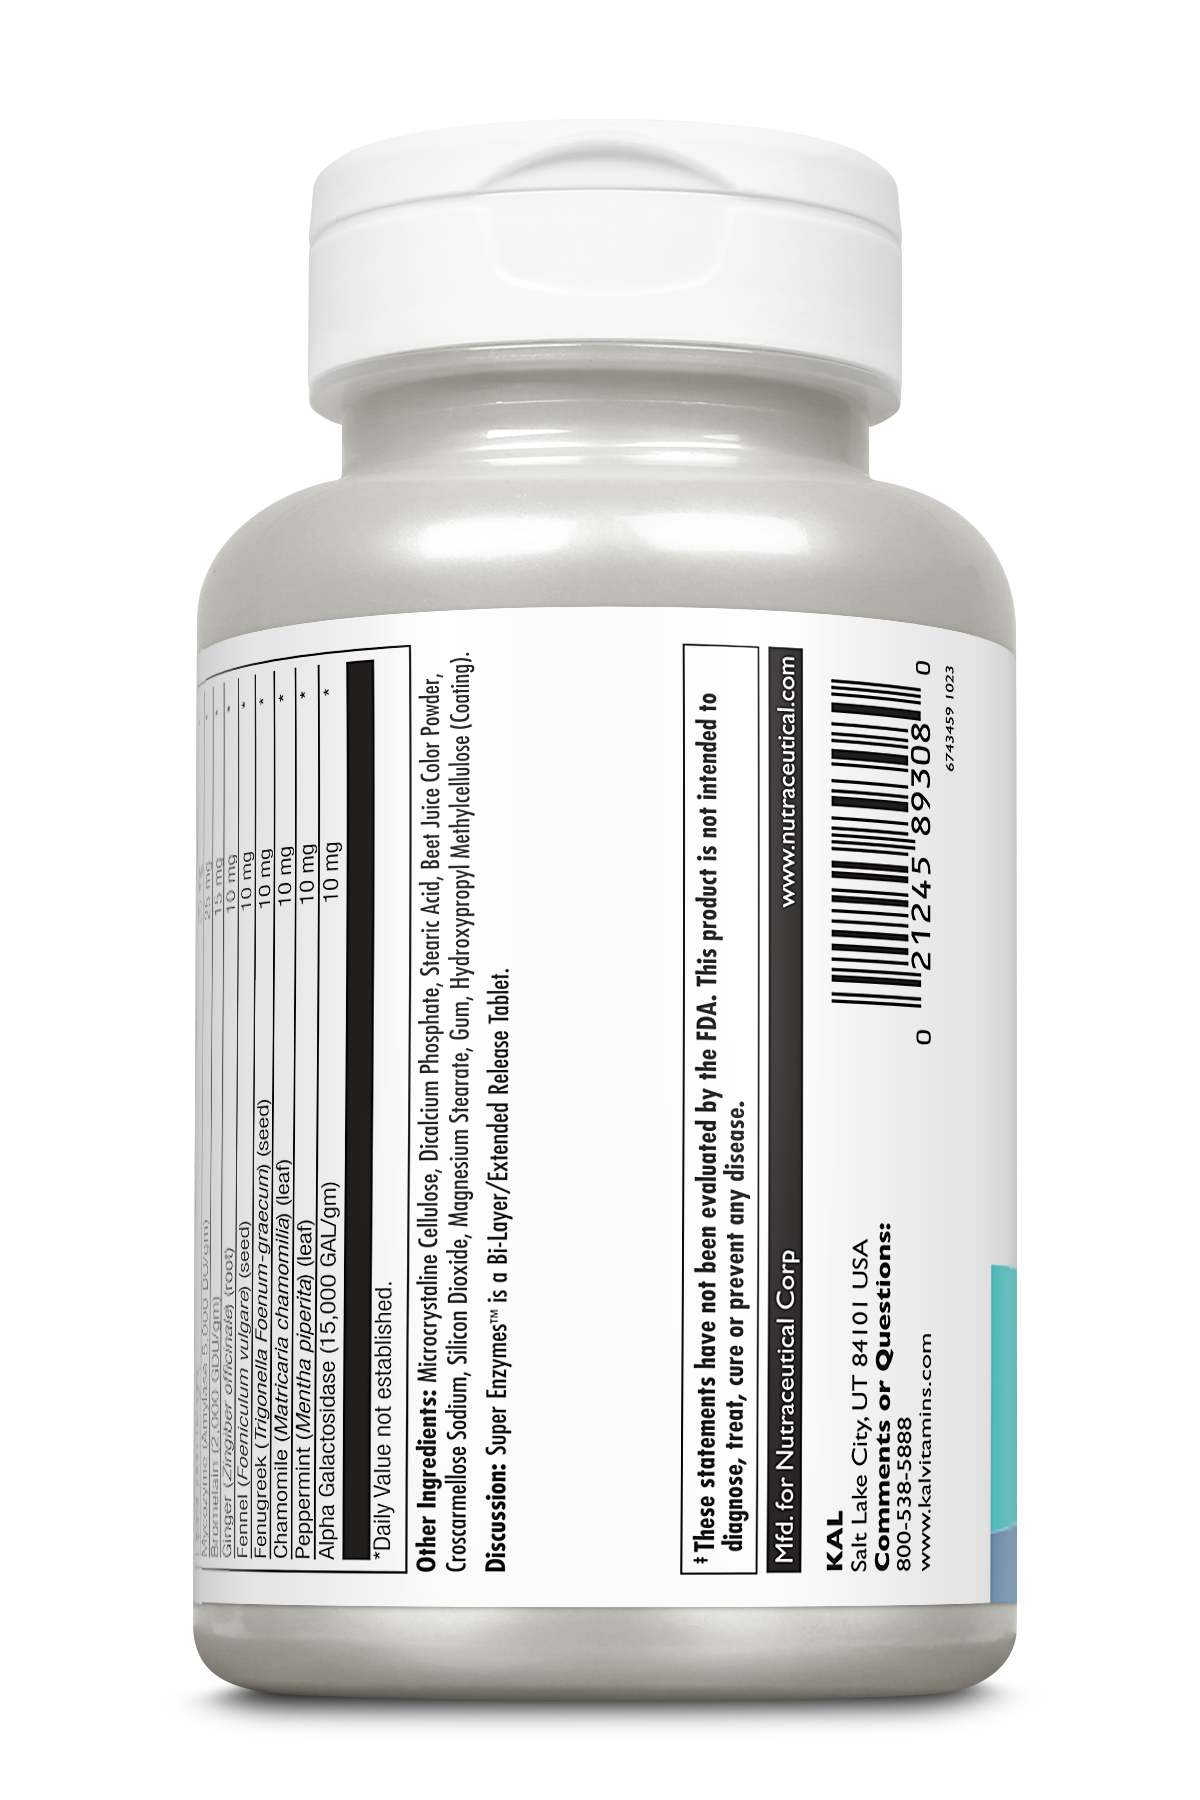 Super Enzymes™ Clinical Lifestyles™ Tablets